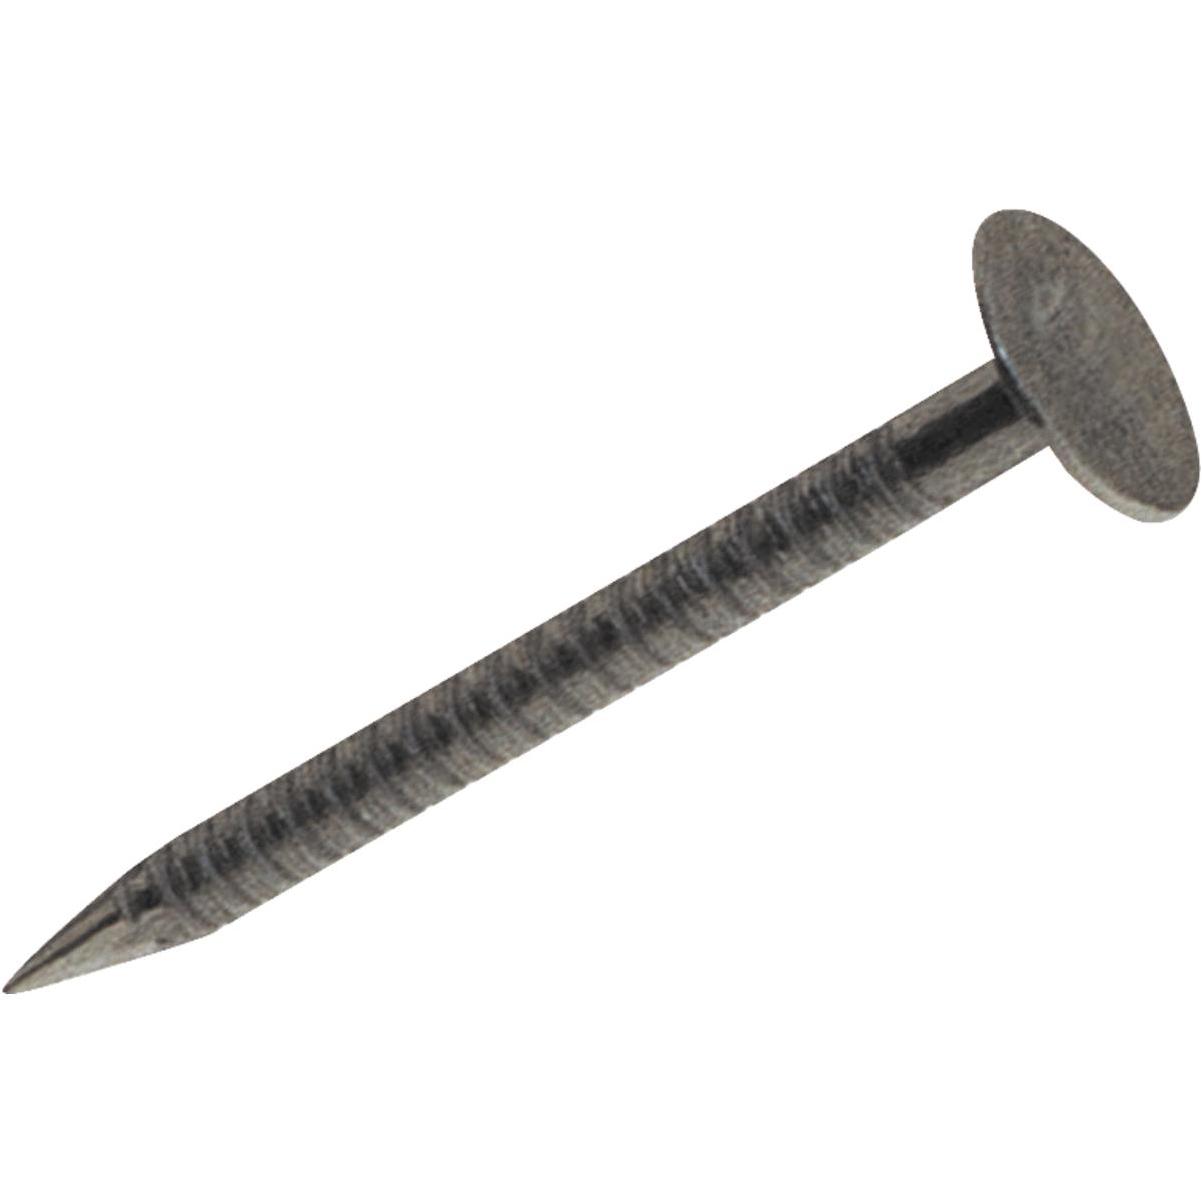 Order Online Ring Shank Nails 25mm x 2.0 x 1Kg from CoreBuild.ie Ireland